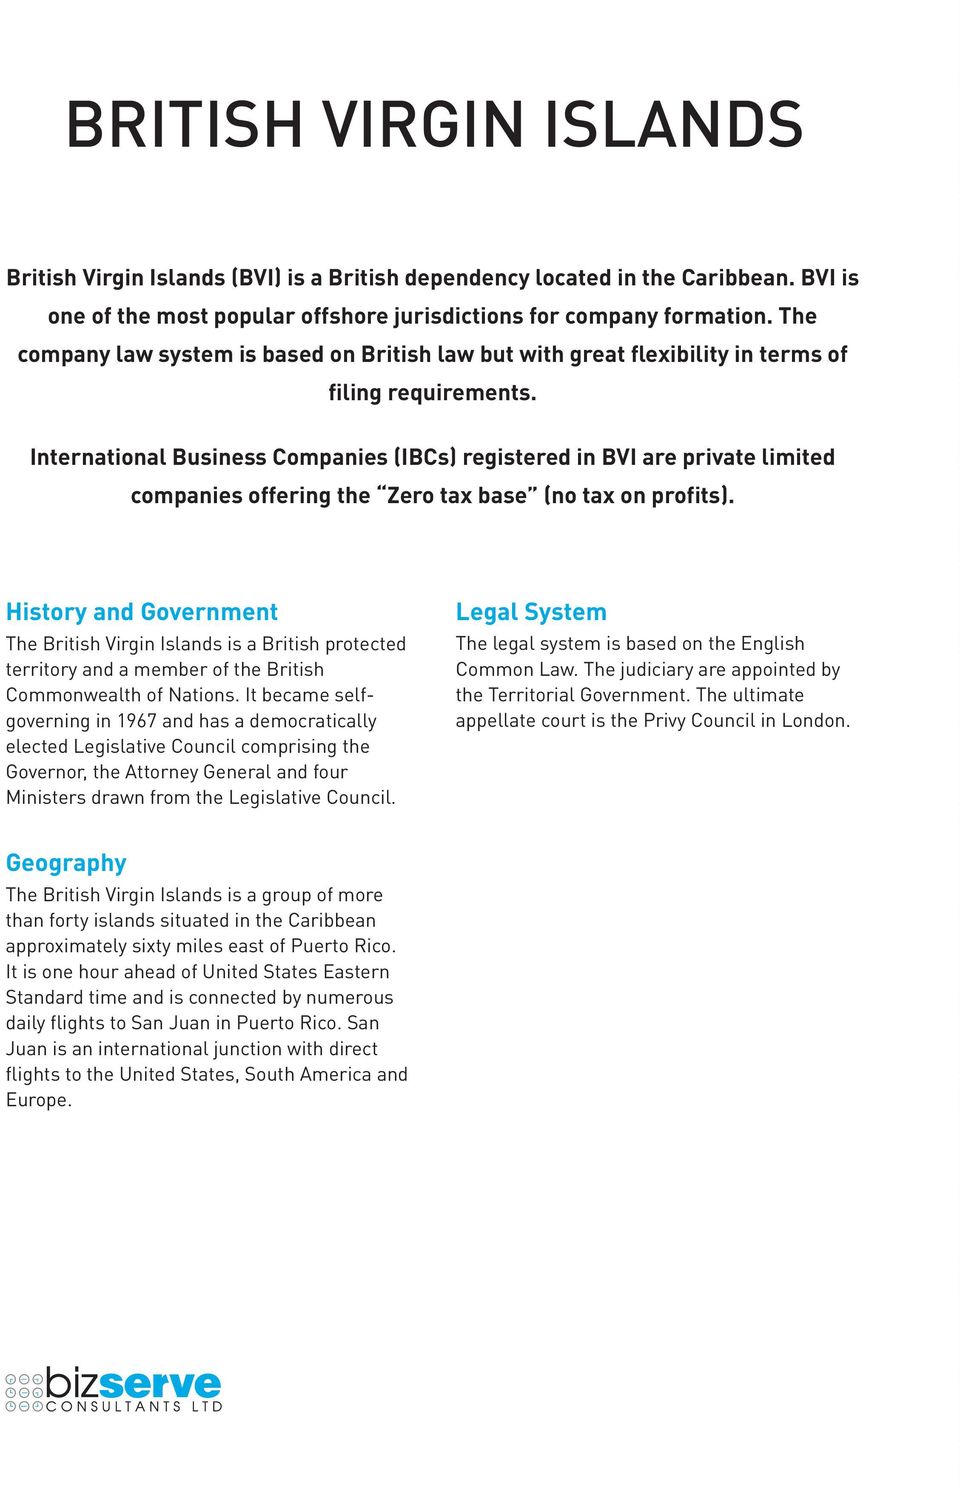 International Business Companies (IBCs) registered in BVI are private limited companies offering the Zero tax base (no tax on profits).